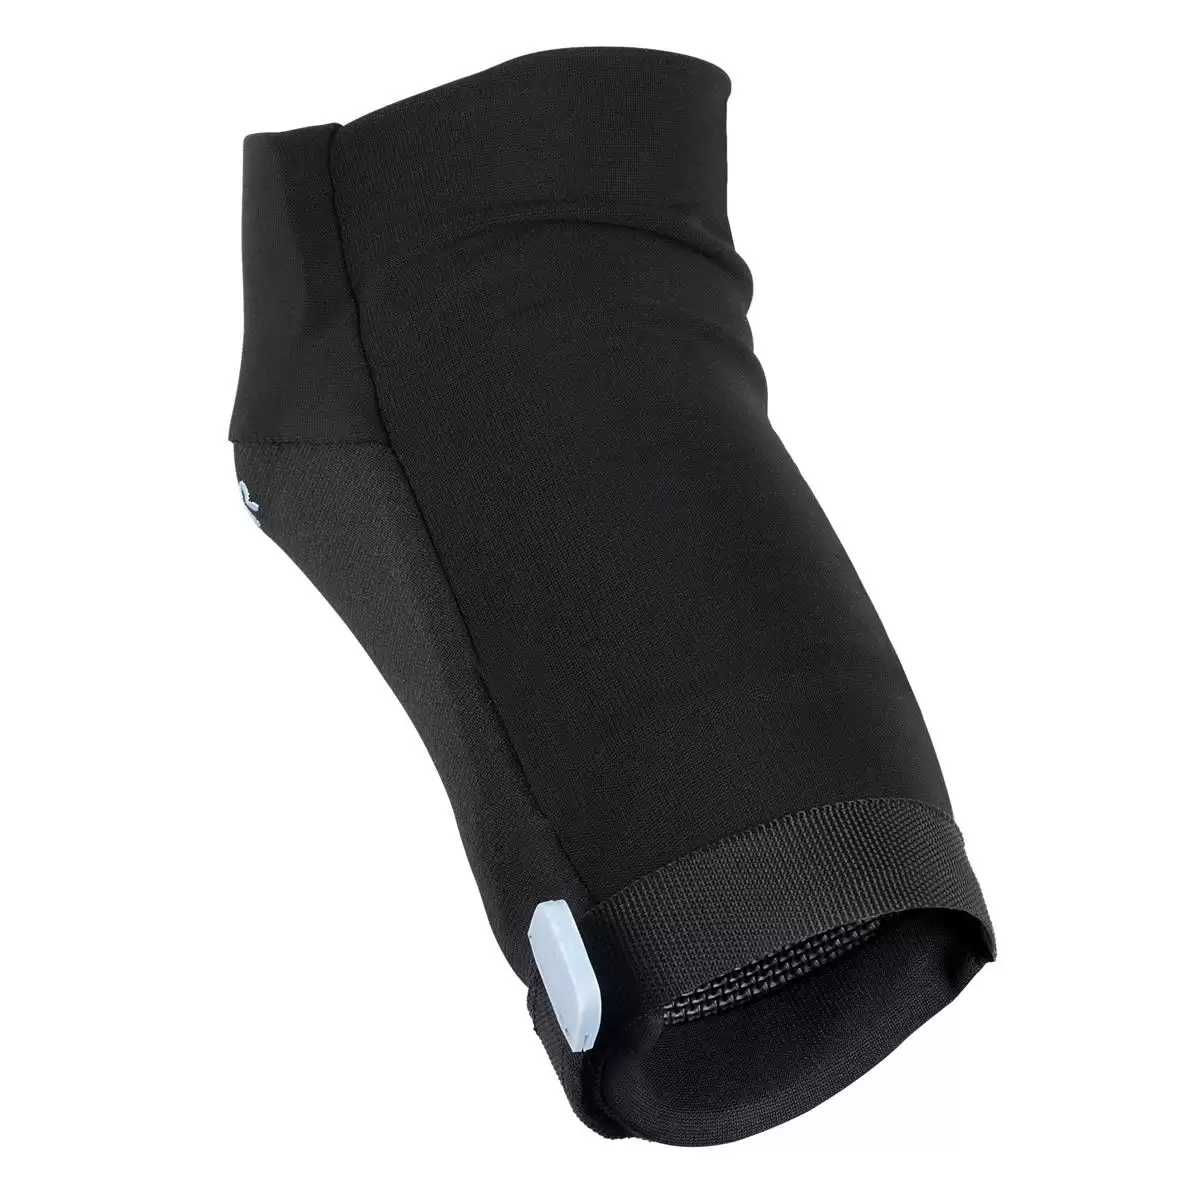 Joint VPD Air Elbow pads Black Size XL #2